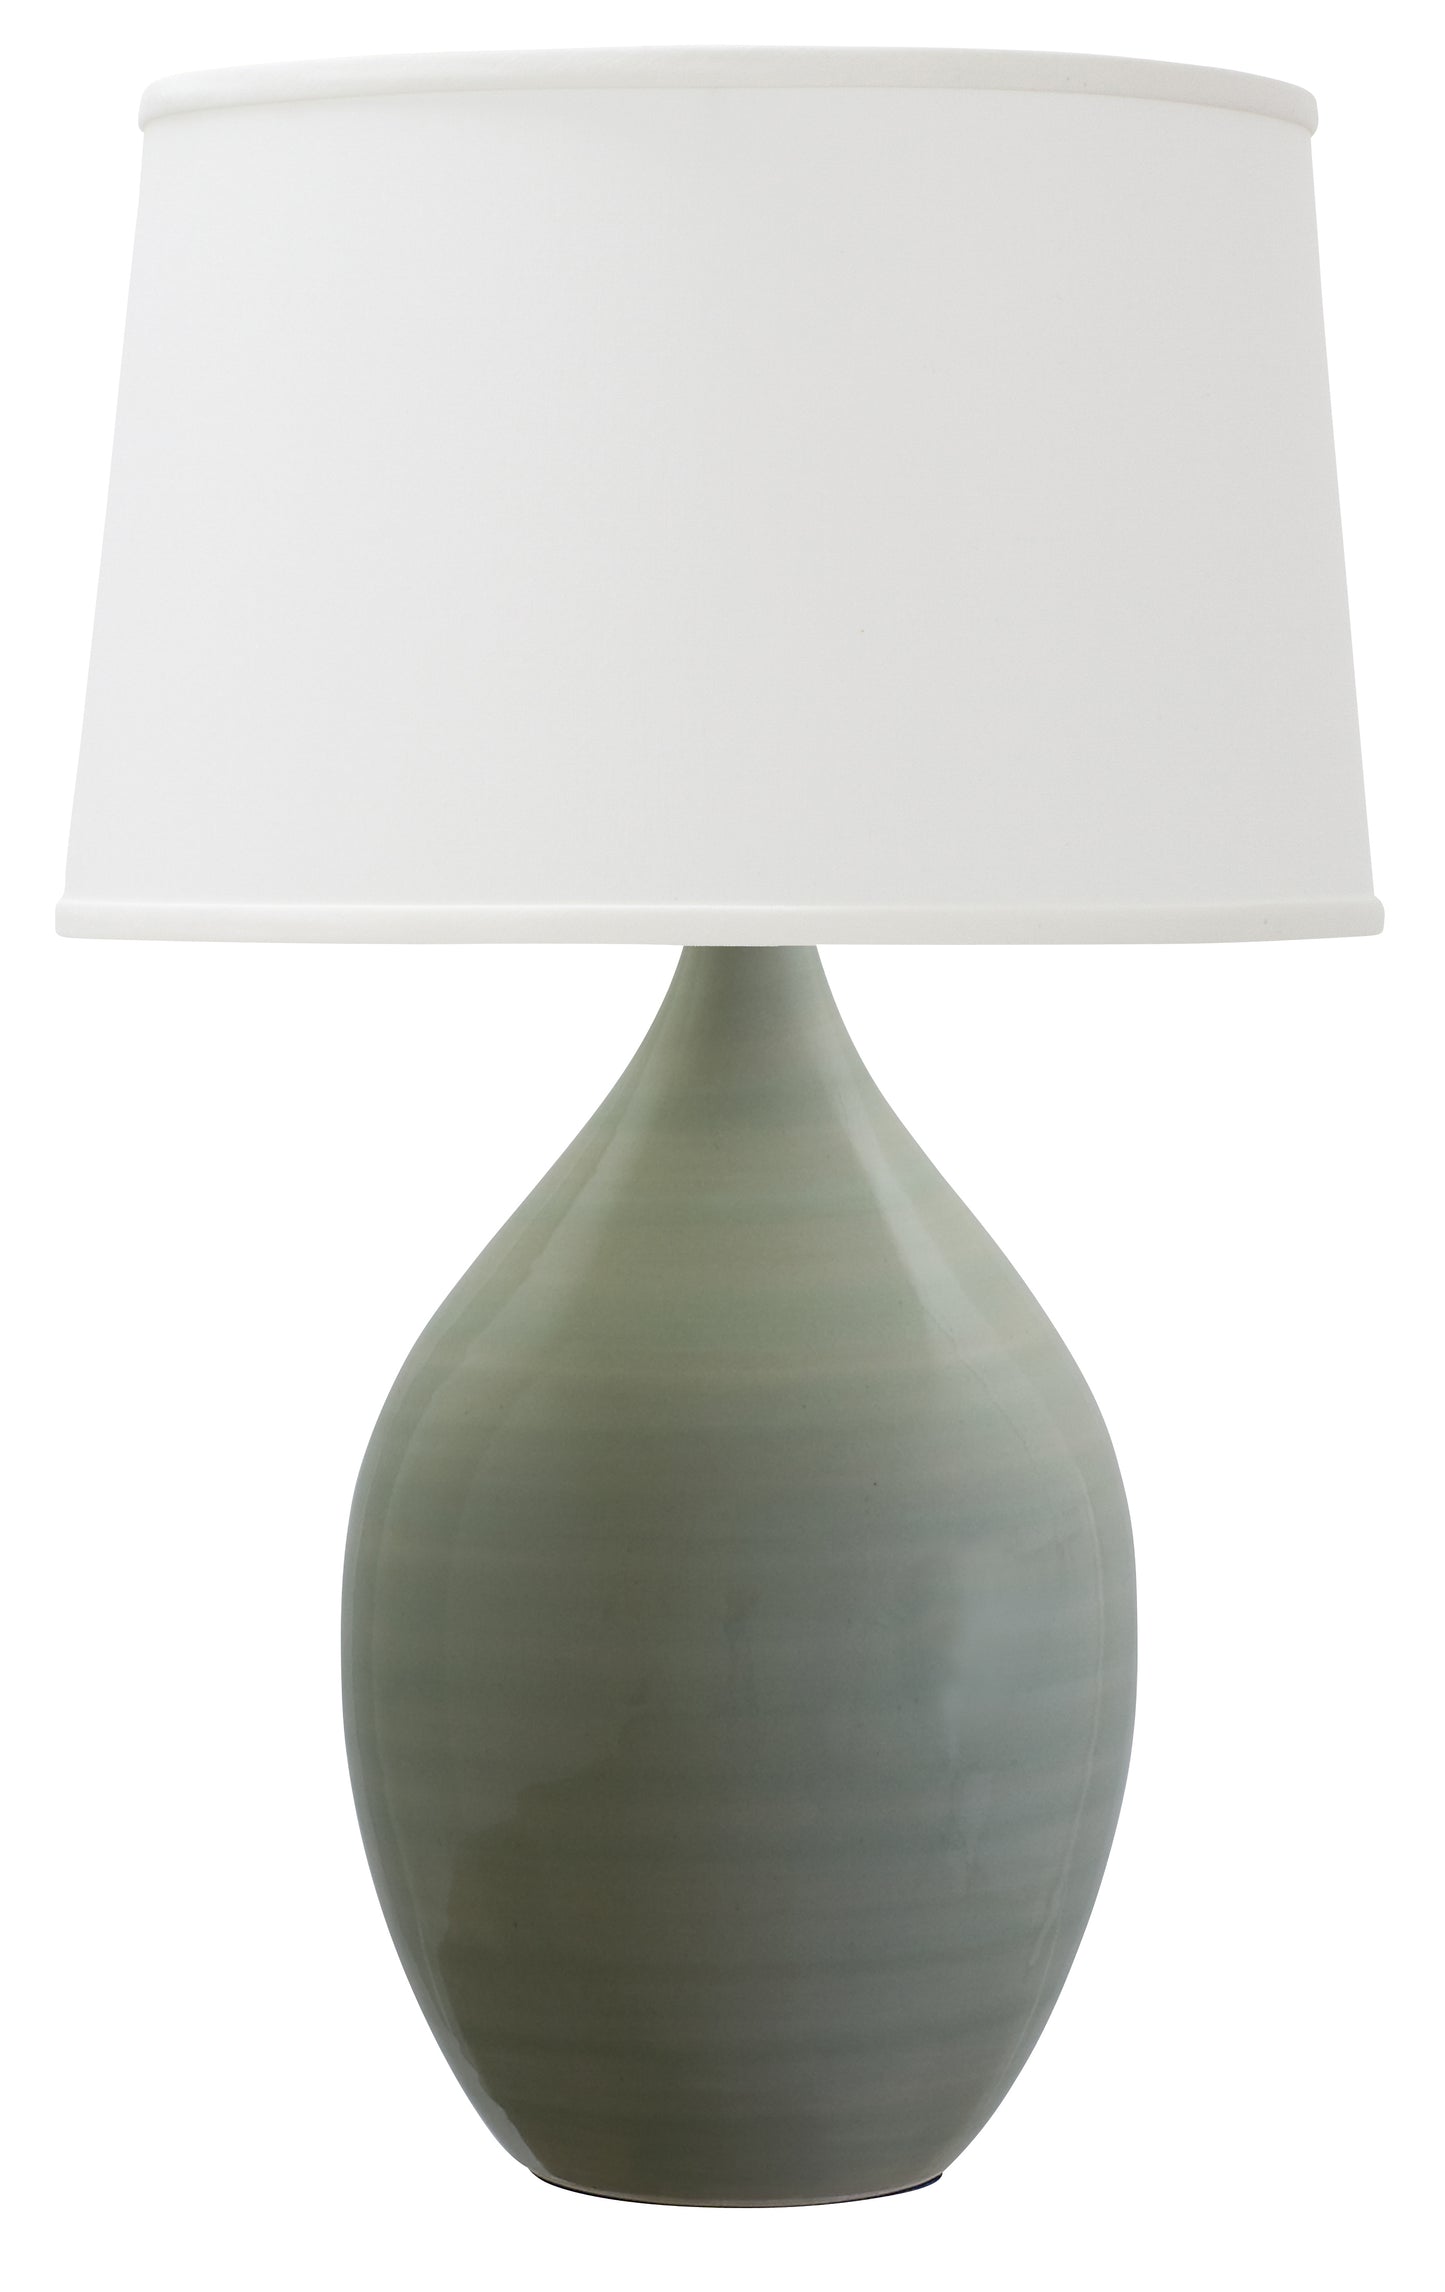 House of Troy Scatchard 18.5" Stoneware Table Lamp in Celadon GS202-CG